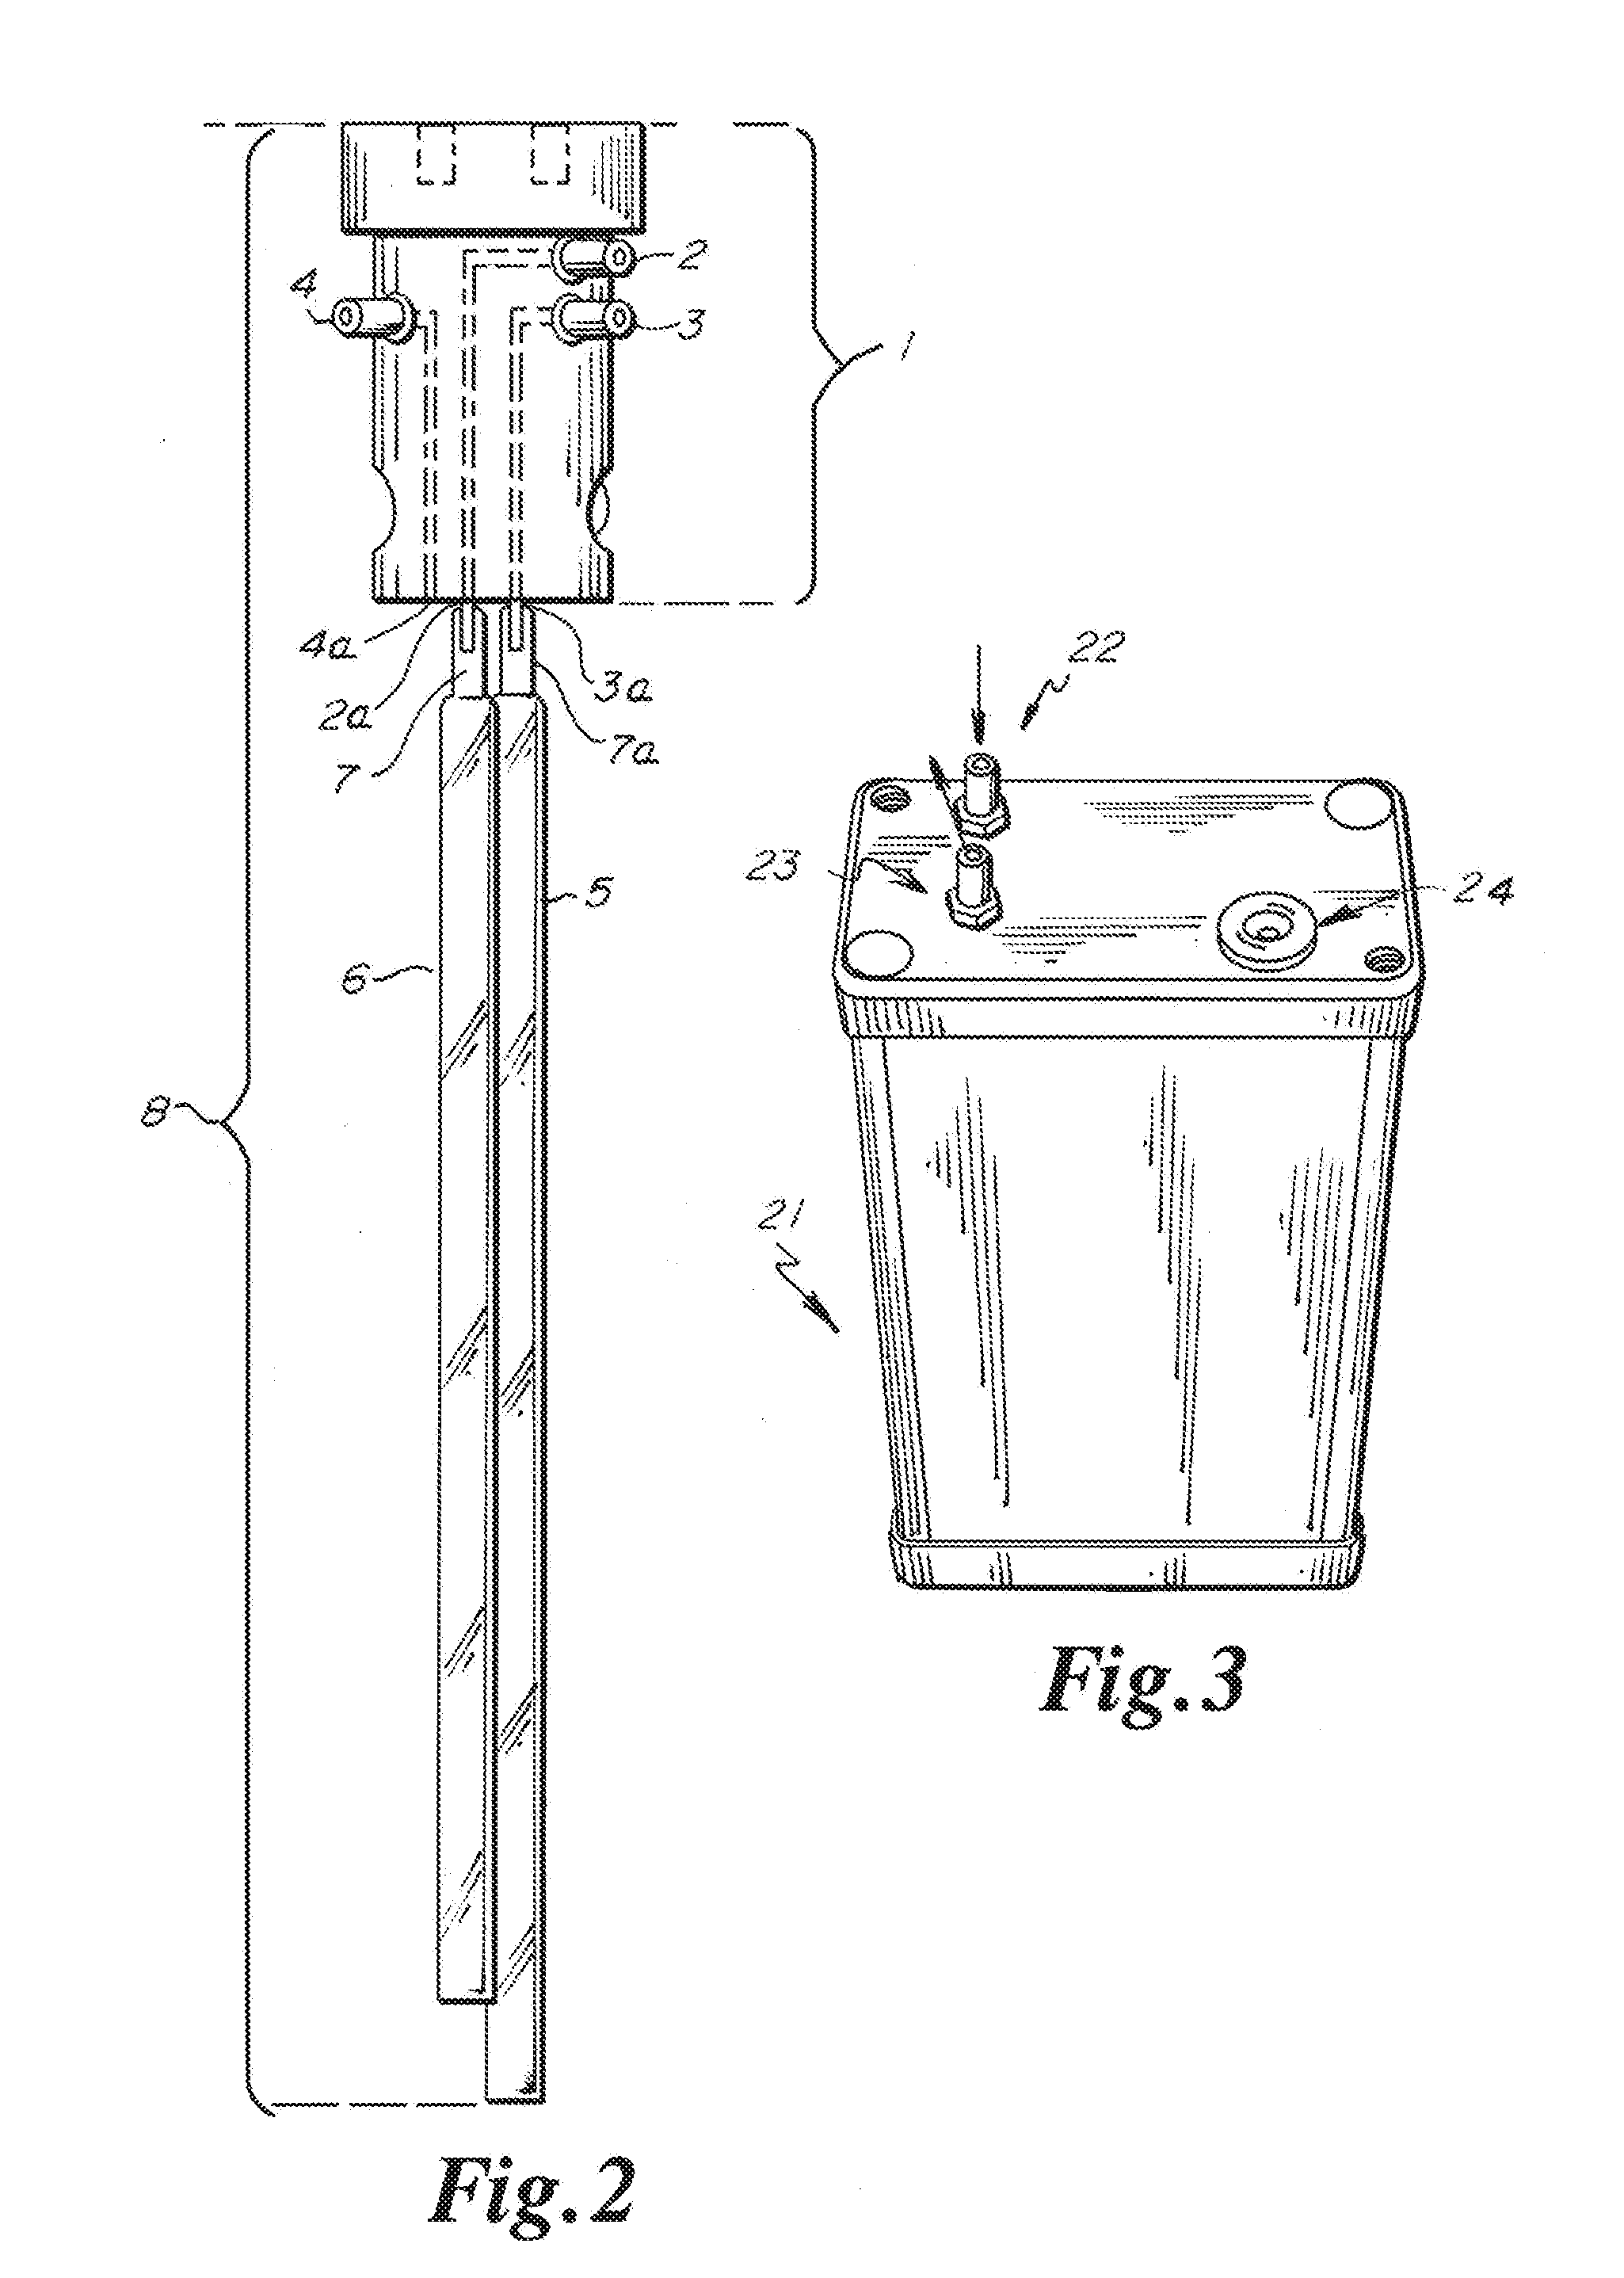 Device and system to improve asepsis in dental apparatus